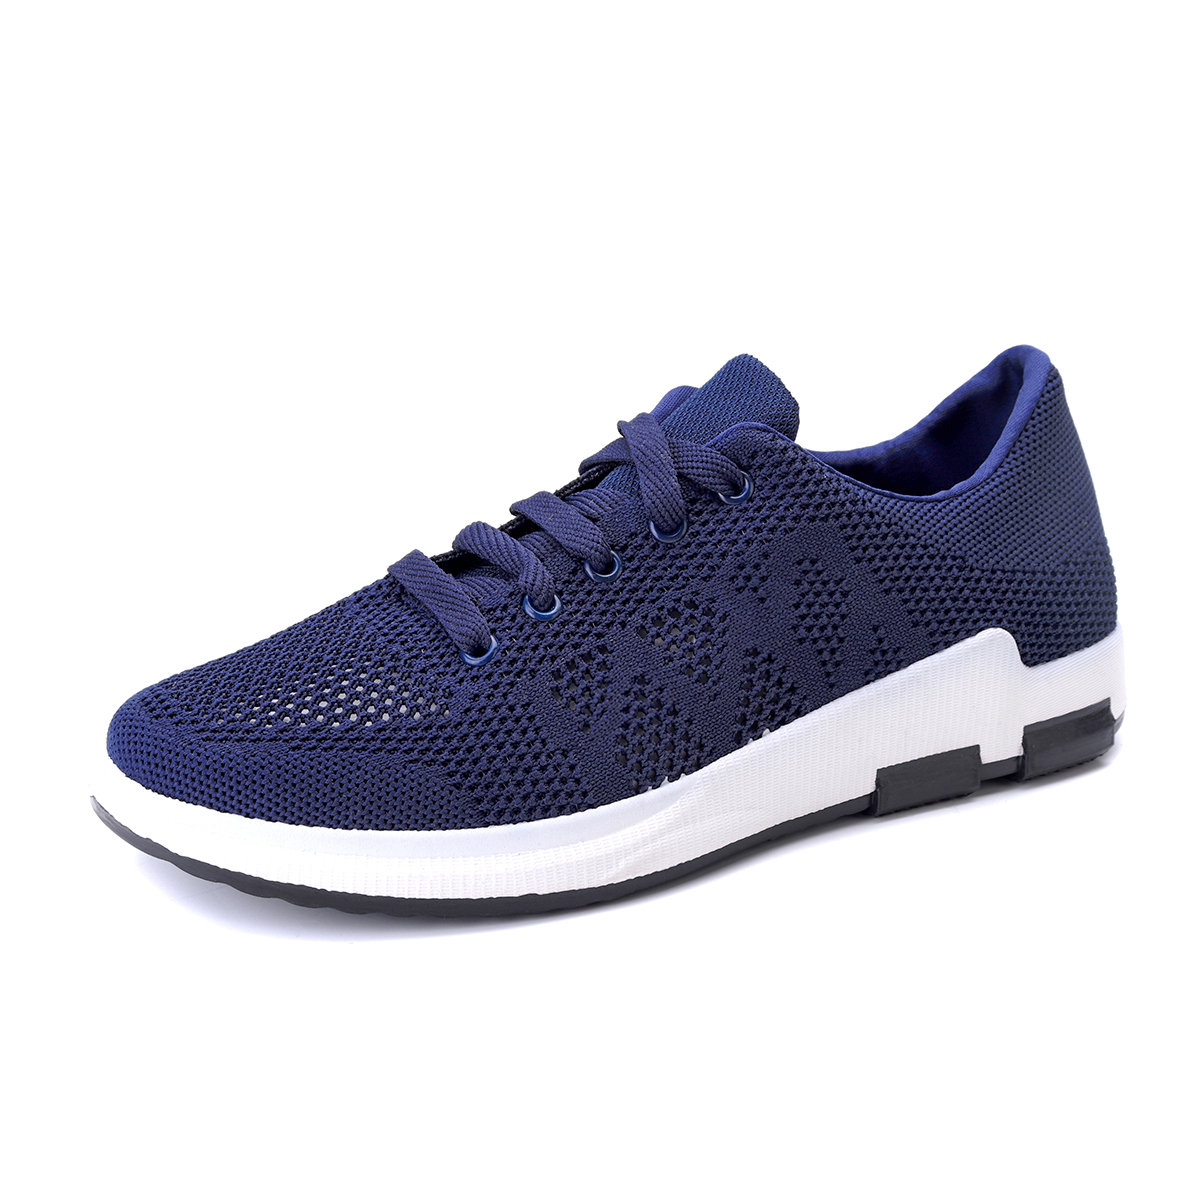 Fashion Men Knitted Fabric Lace Up Running Shoes Casual Walking ...